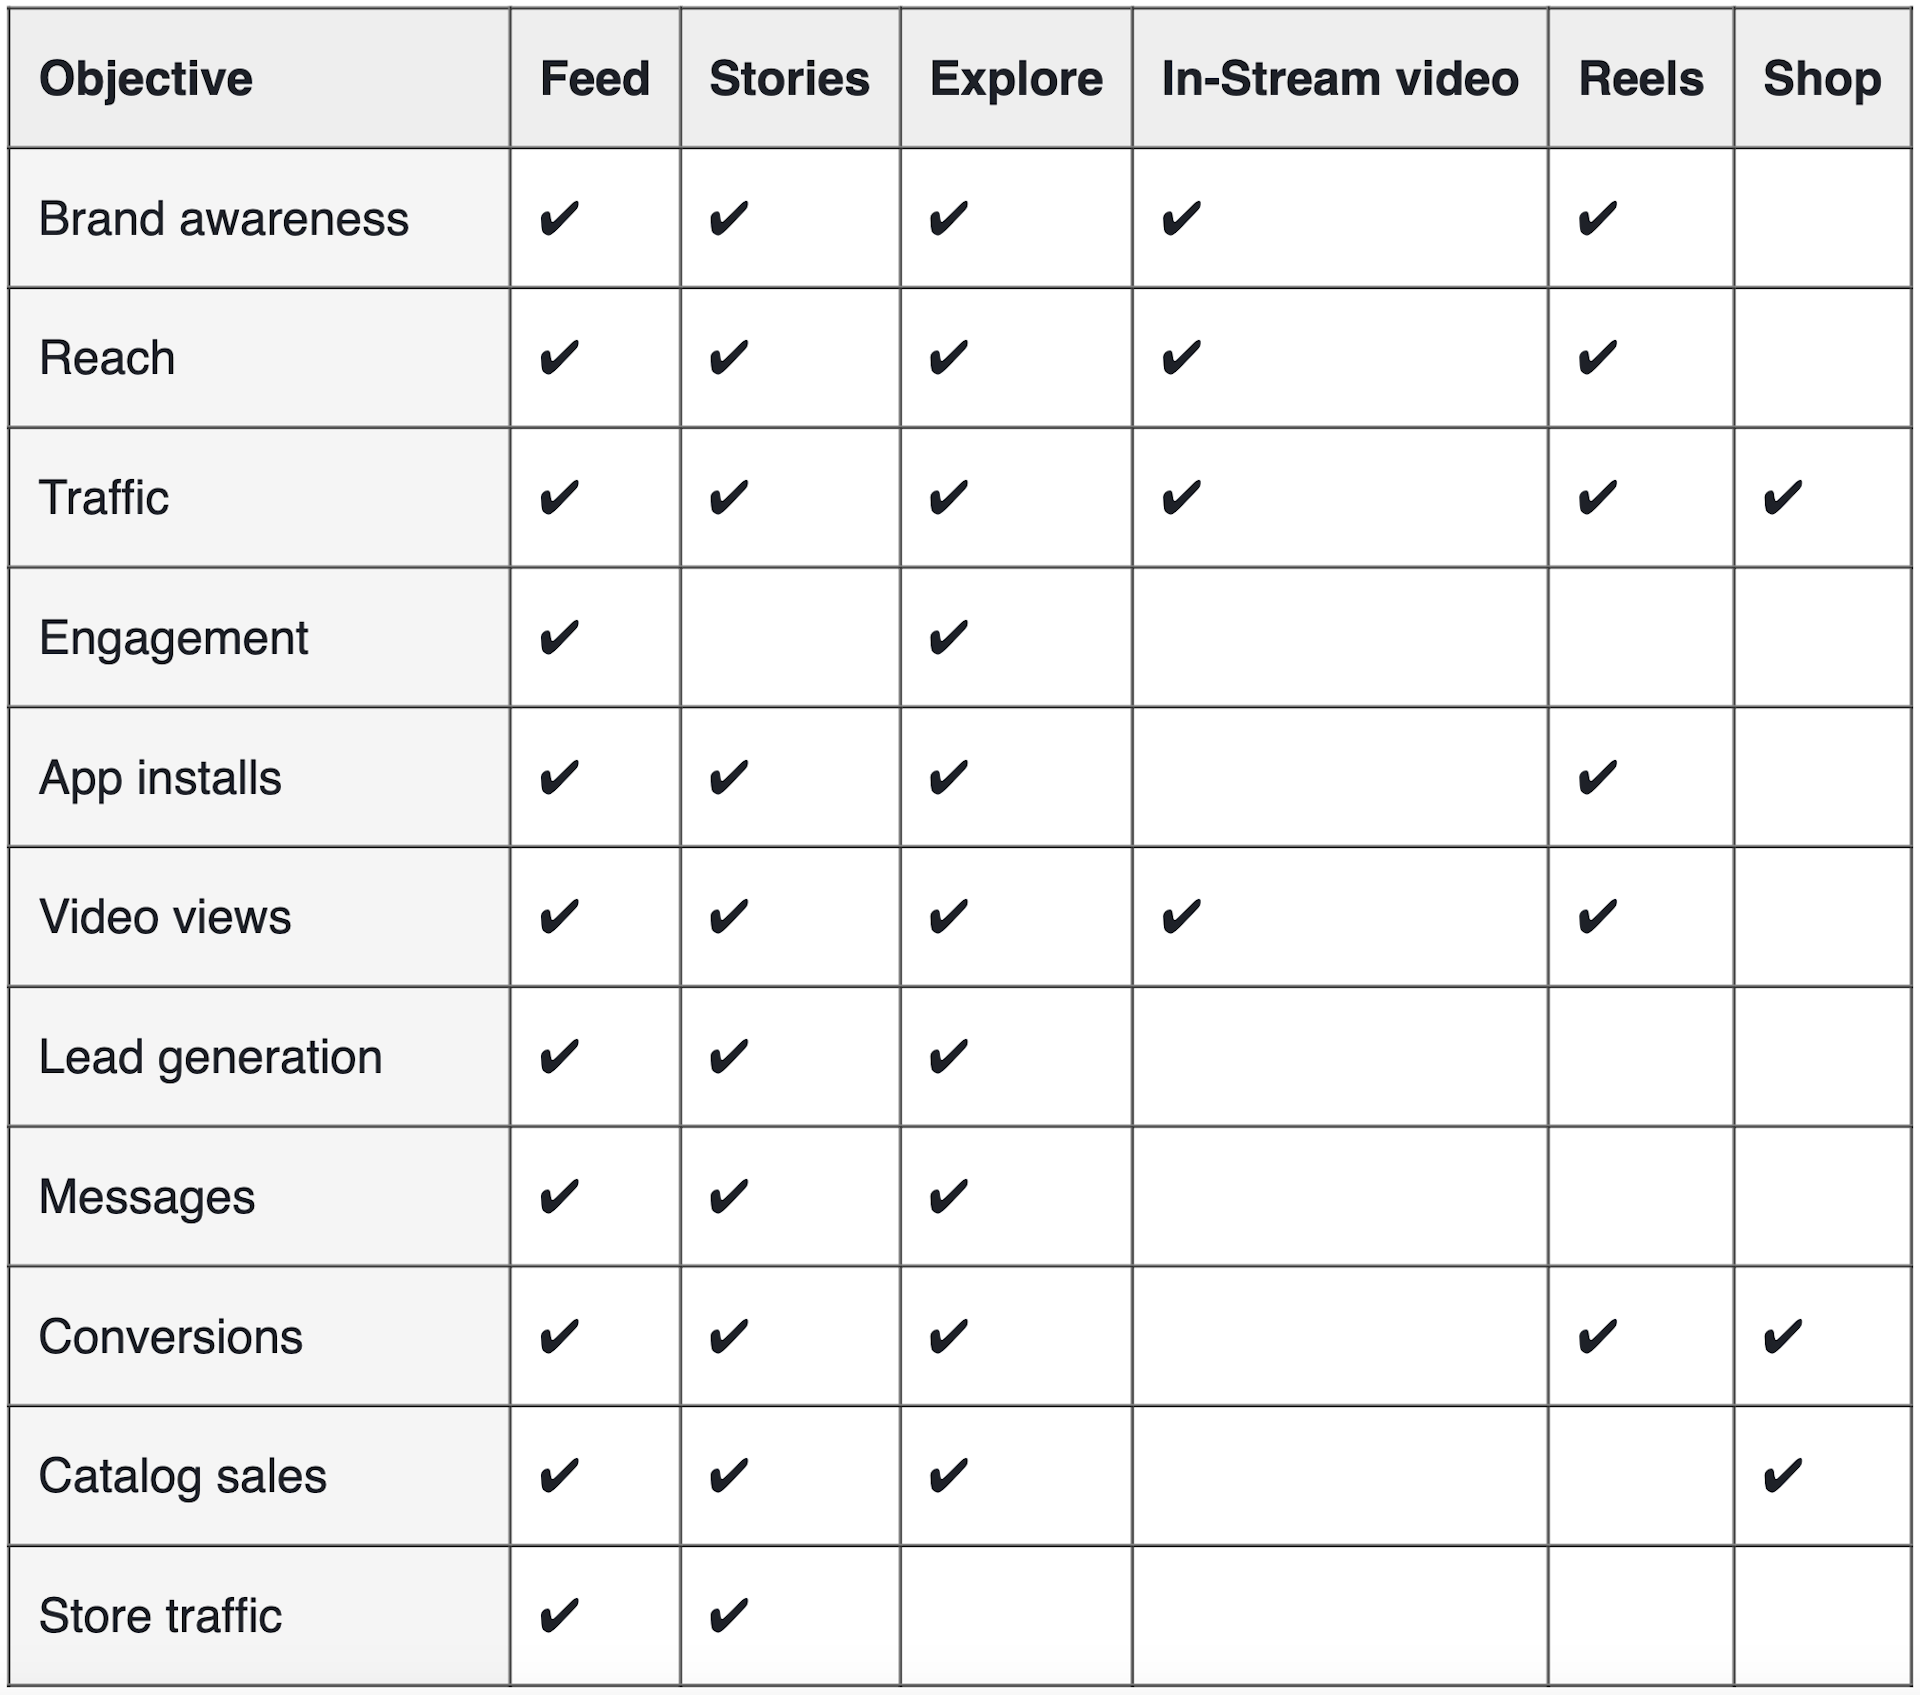 A chart showing Instagram's 2022 ad objectives